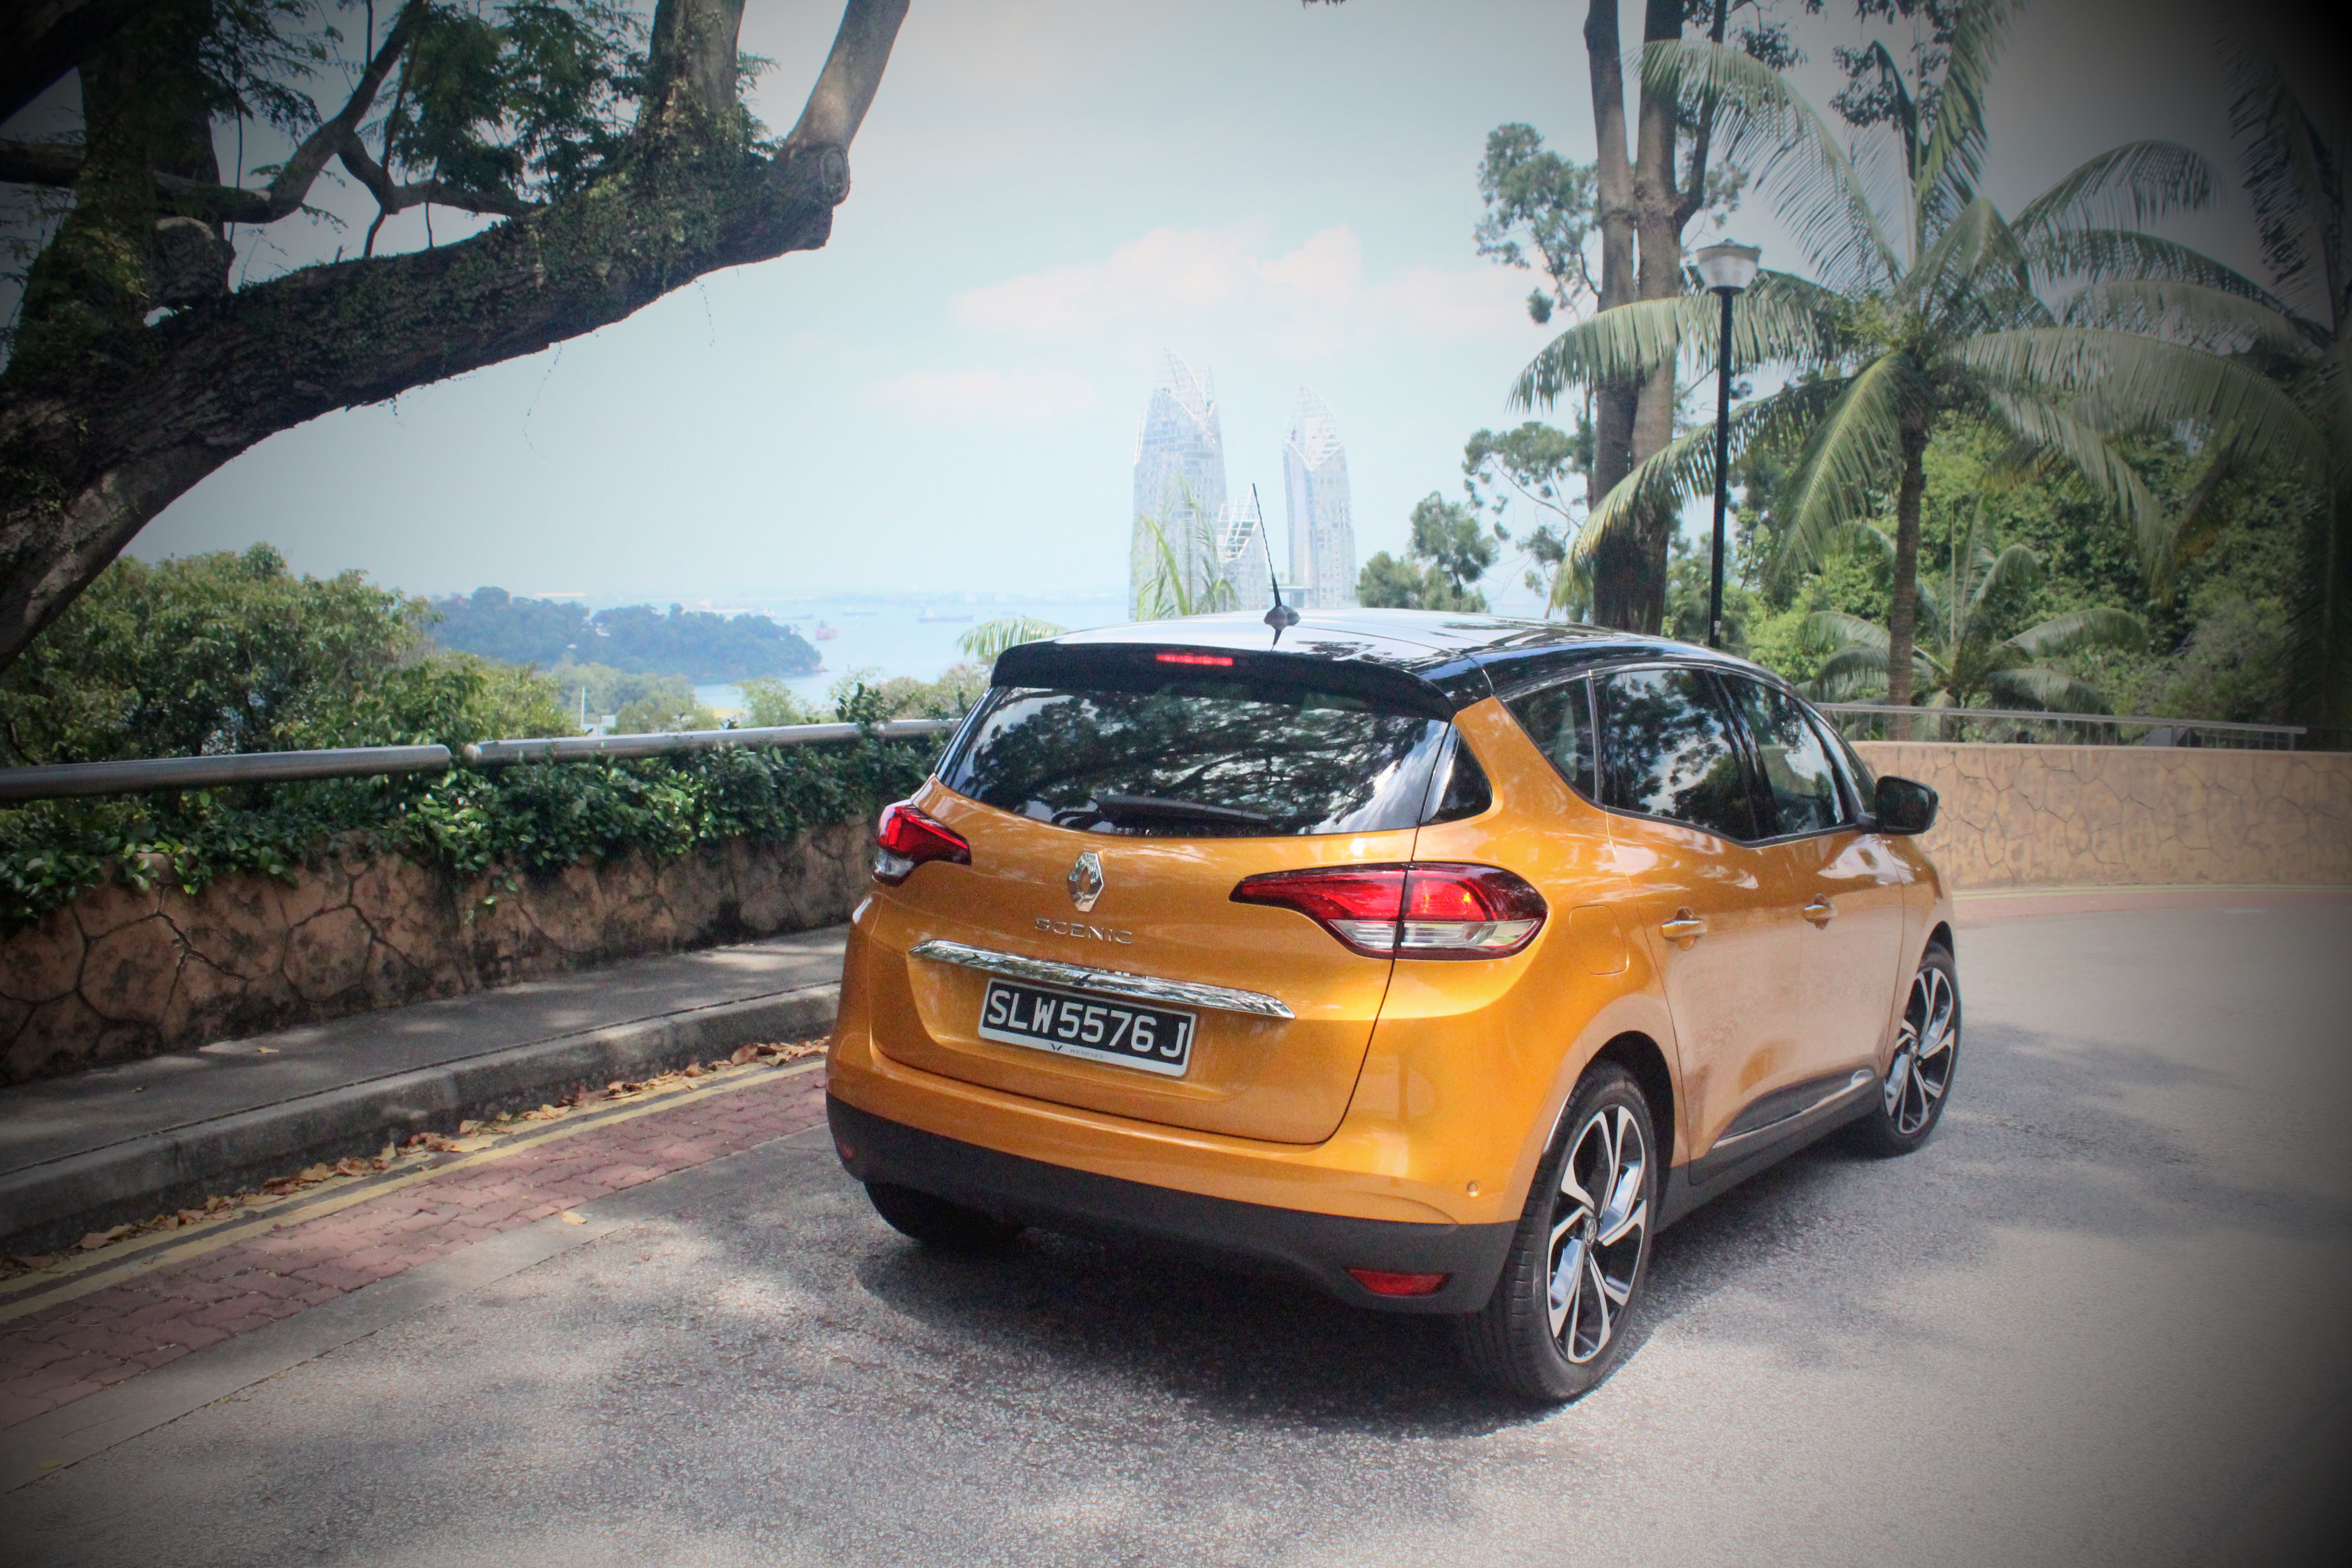 The 2018 Renault Scenic Car Review